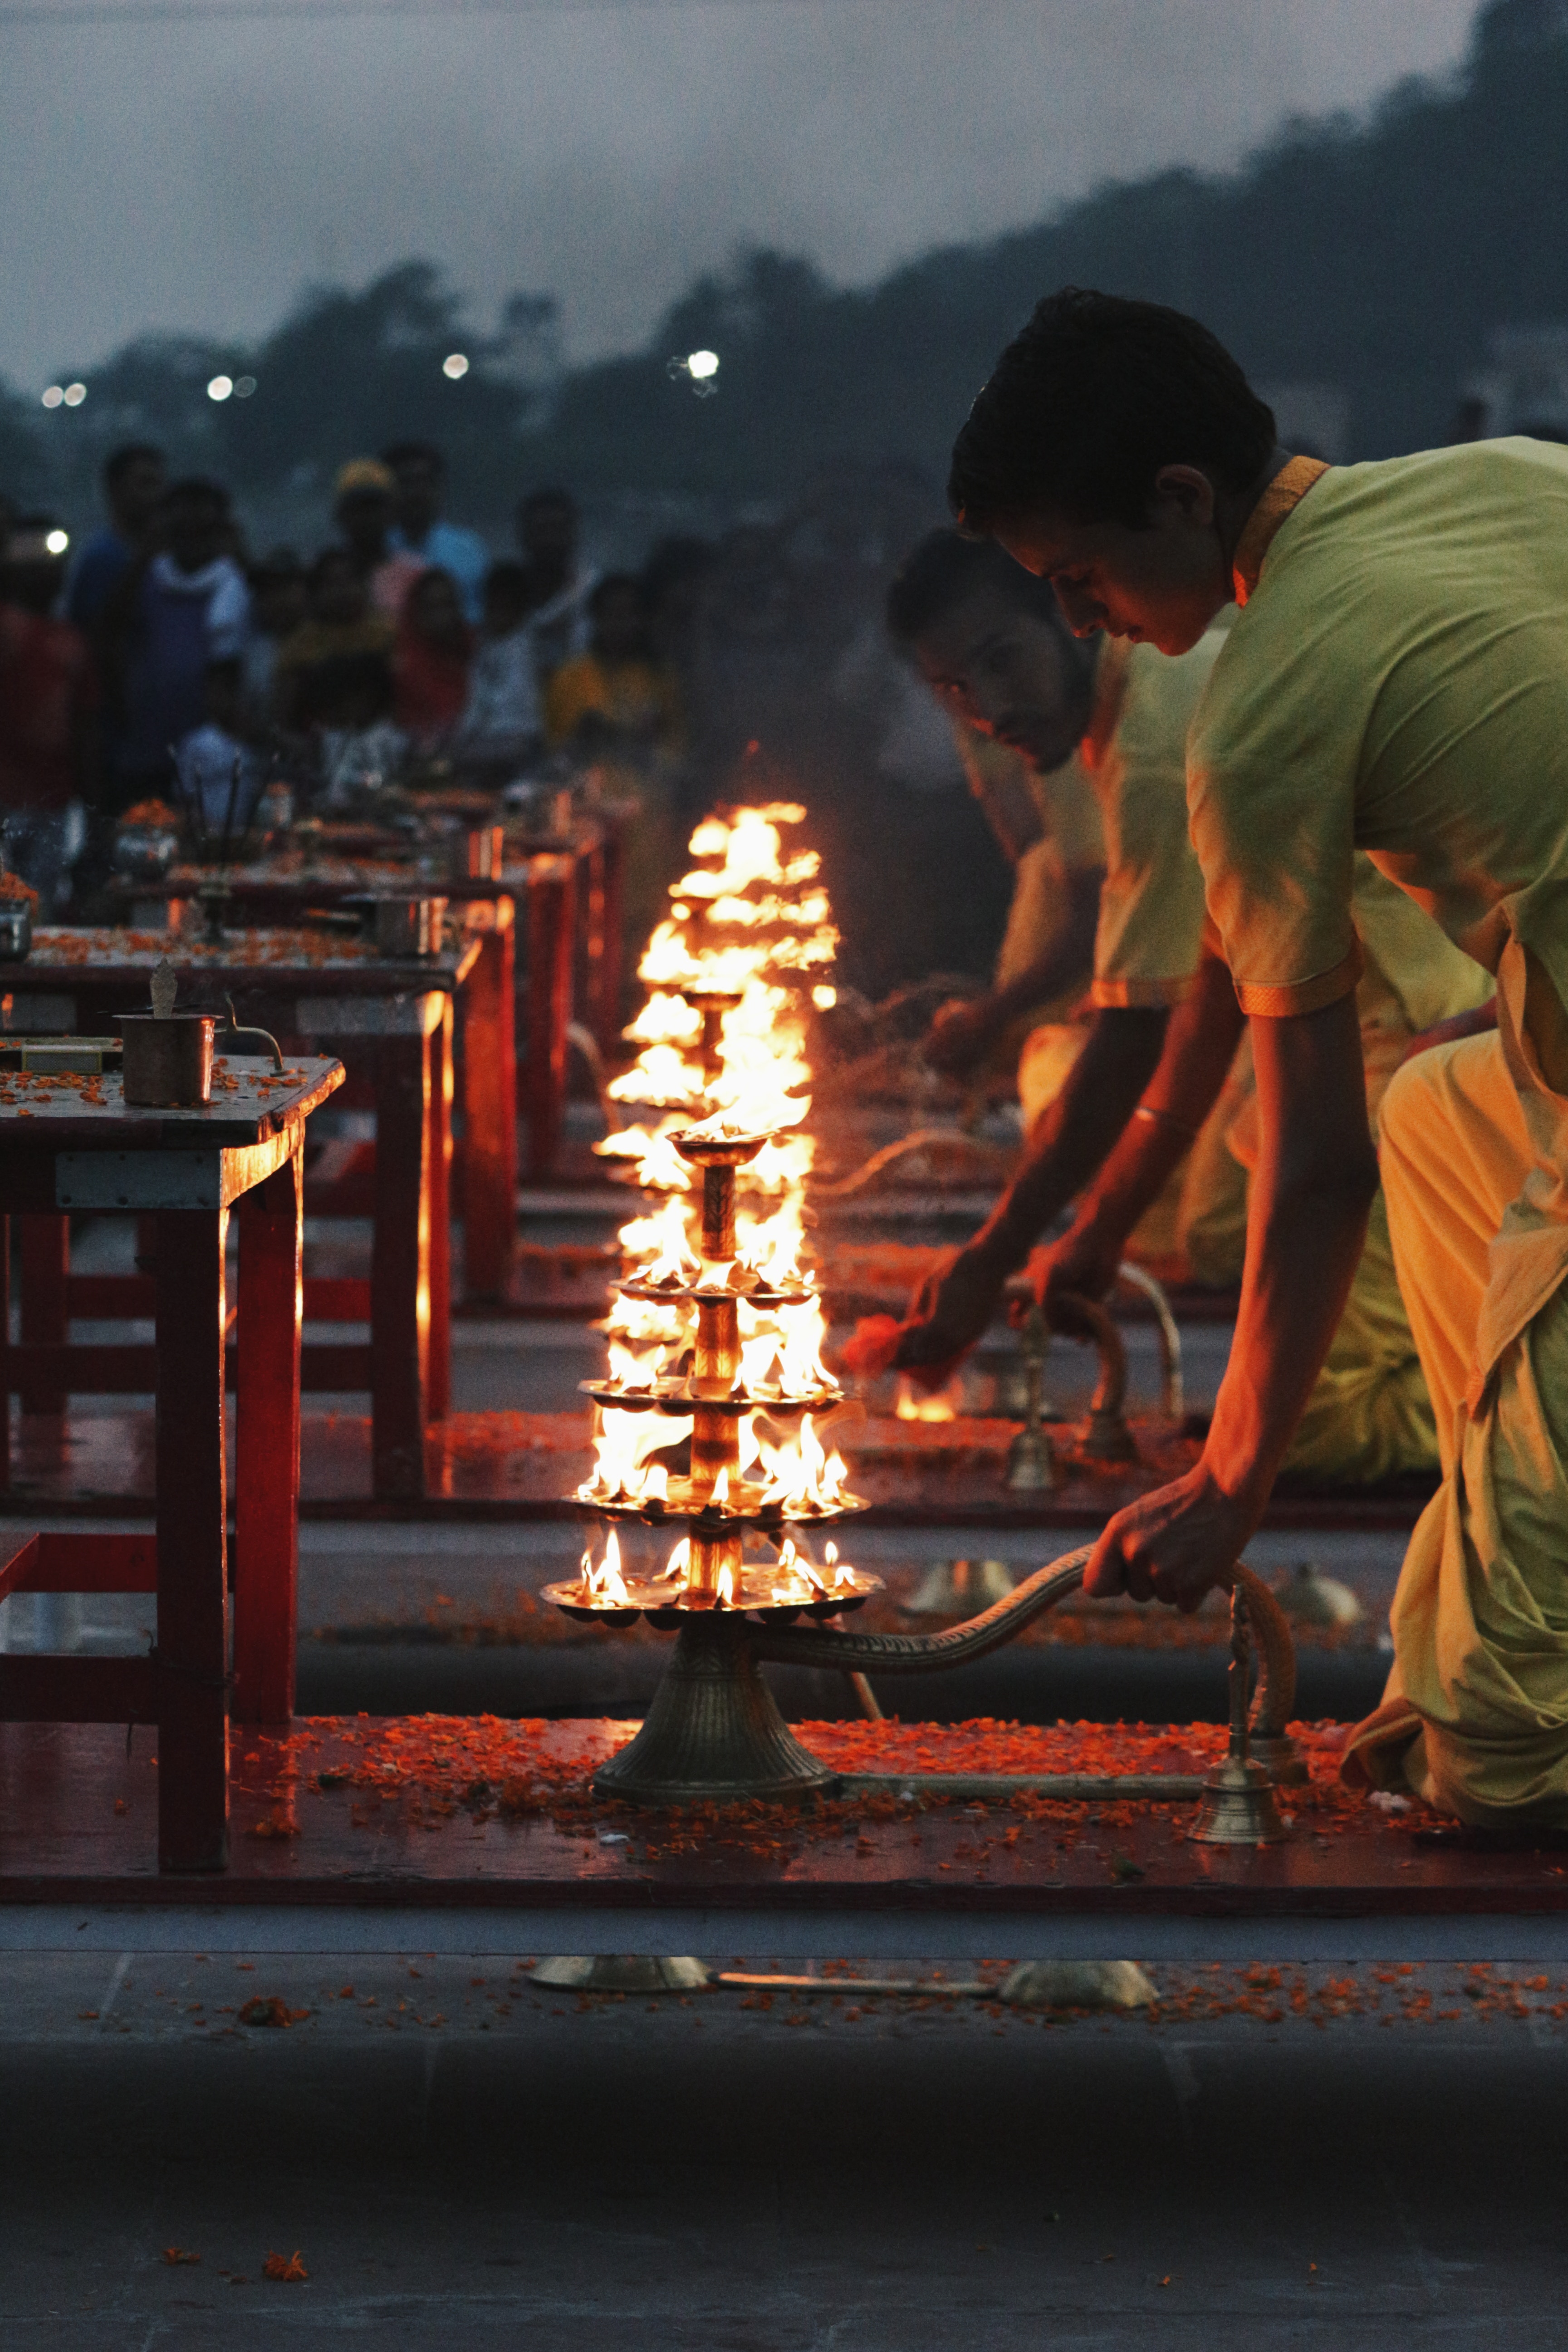 Every evening on the banks of Ganges, thousands of people gather to see the holy prayer (aarti) commence, the advancing darkness of dusk is daunted by the light from thousands of lamps which provide hope for a brighter day tommorow. (Shrey Khurana)